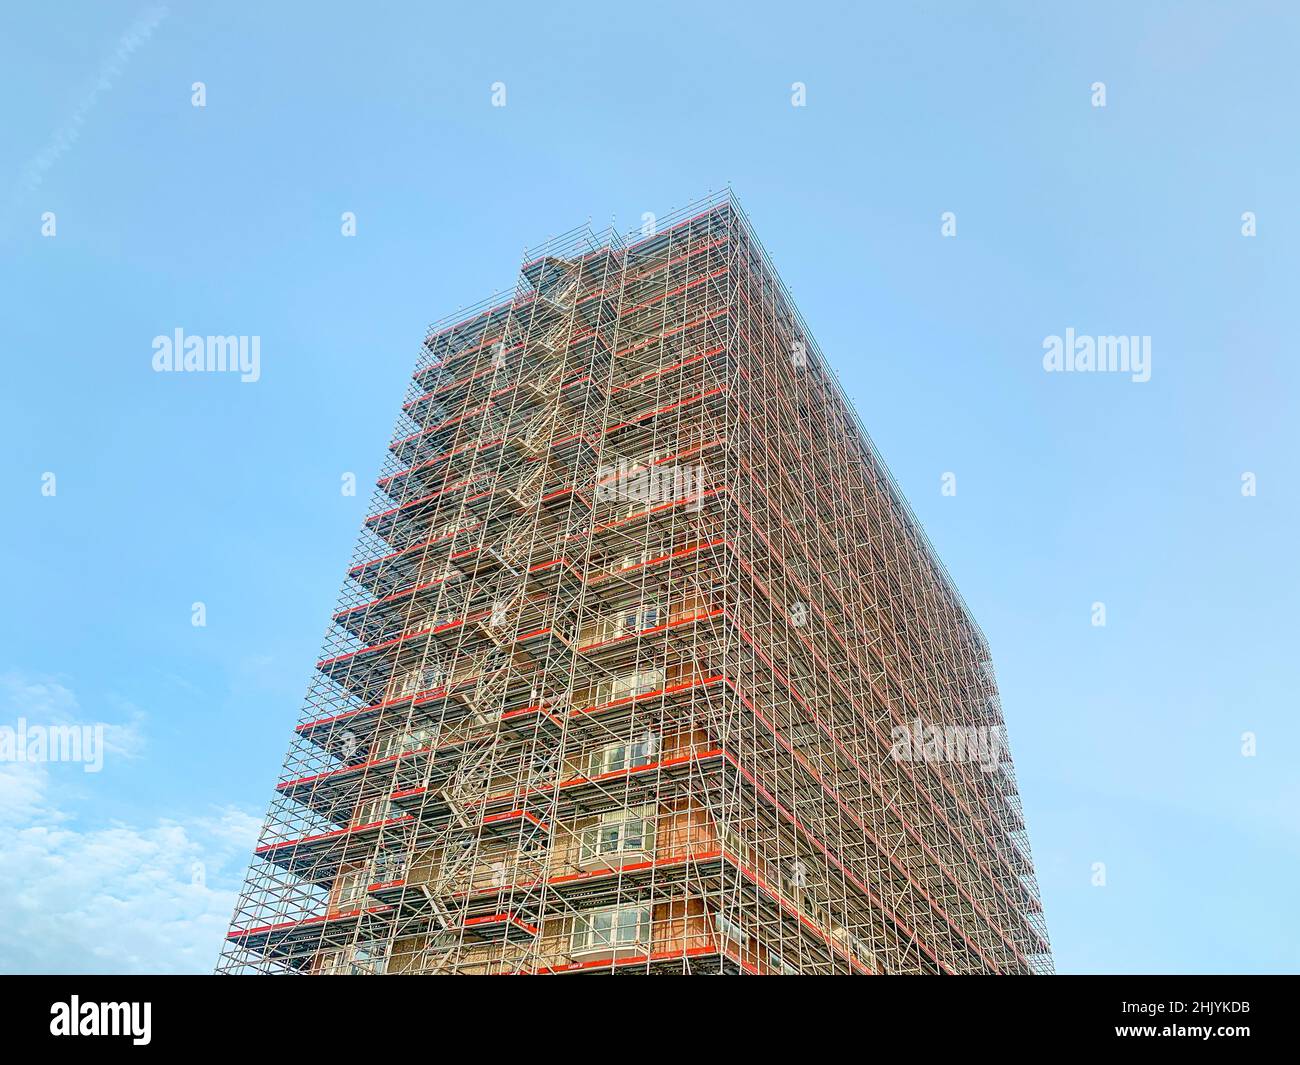 Tower Court, a High-rise Block of Flats in Westcliff-on-Sea Completely Clad in Scaffolding Stock Photo